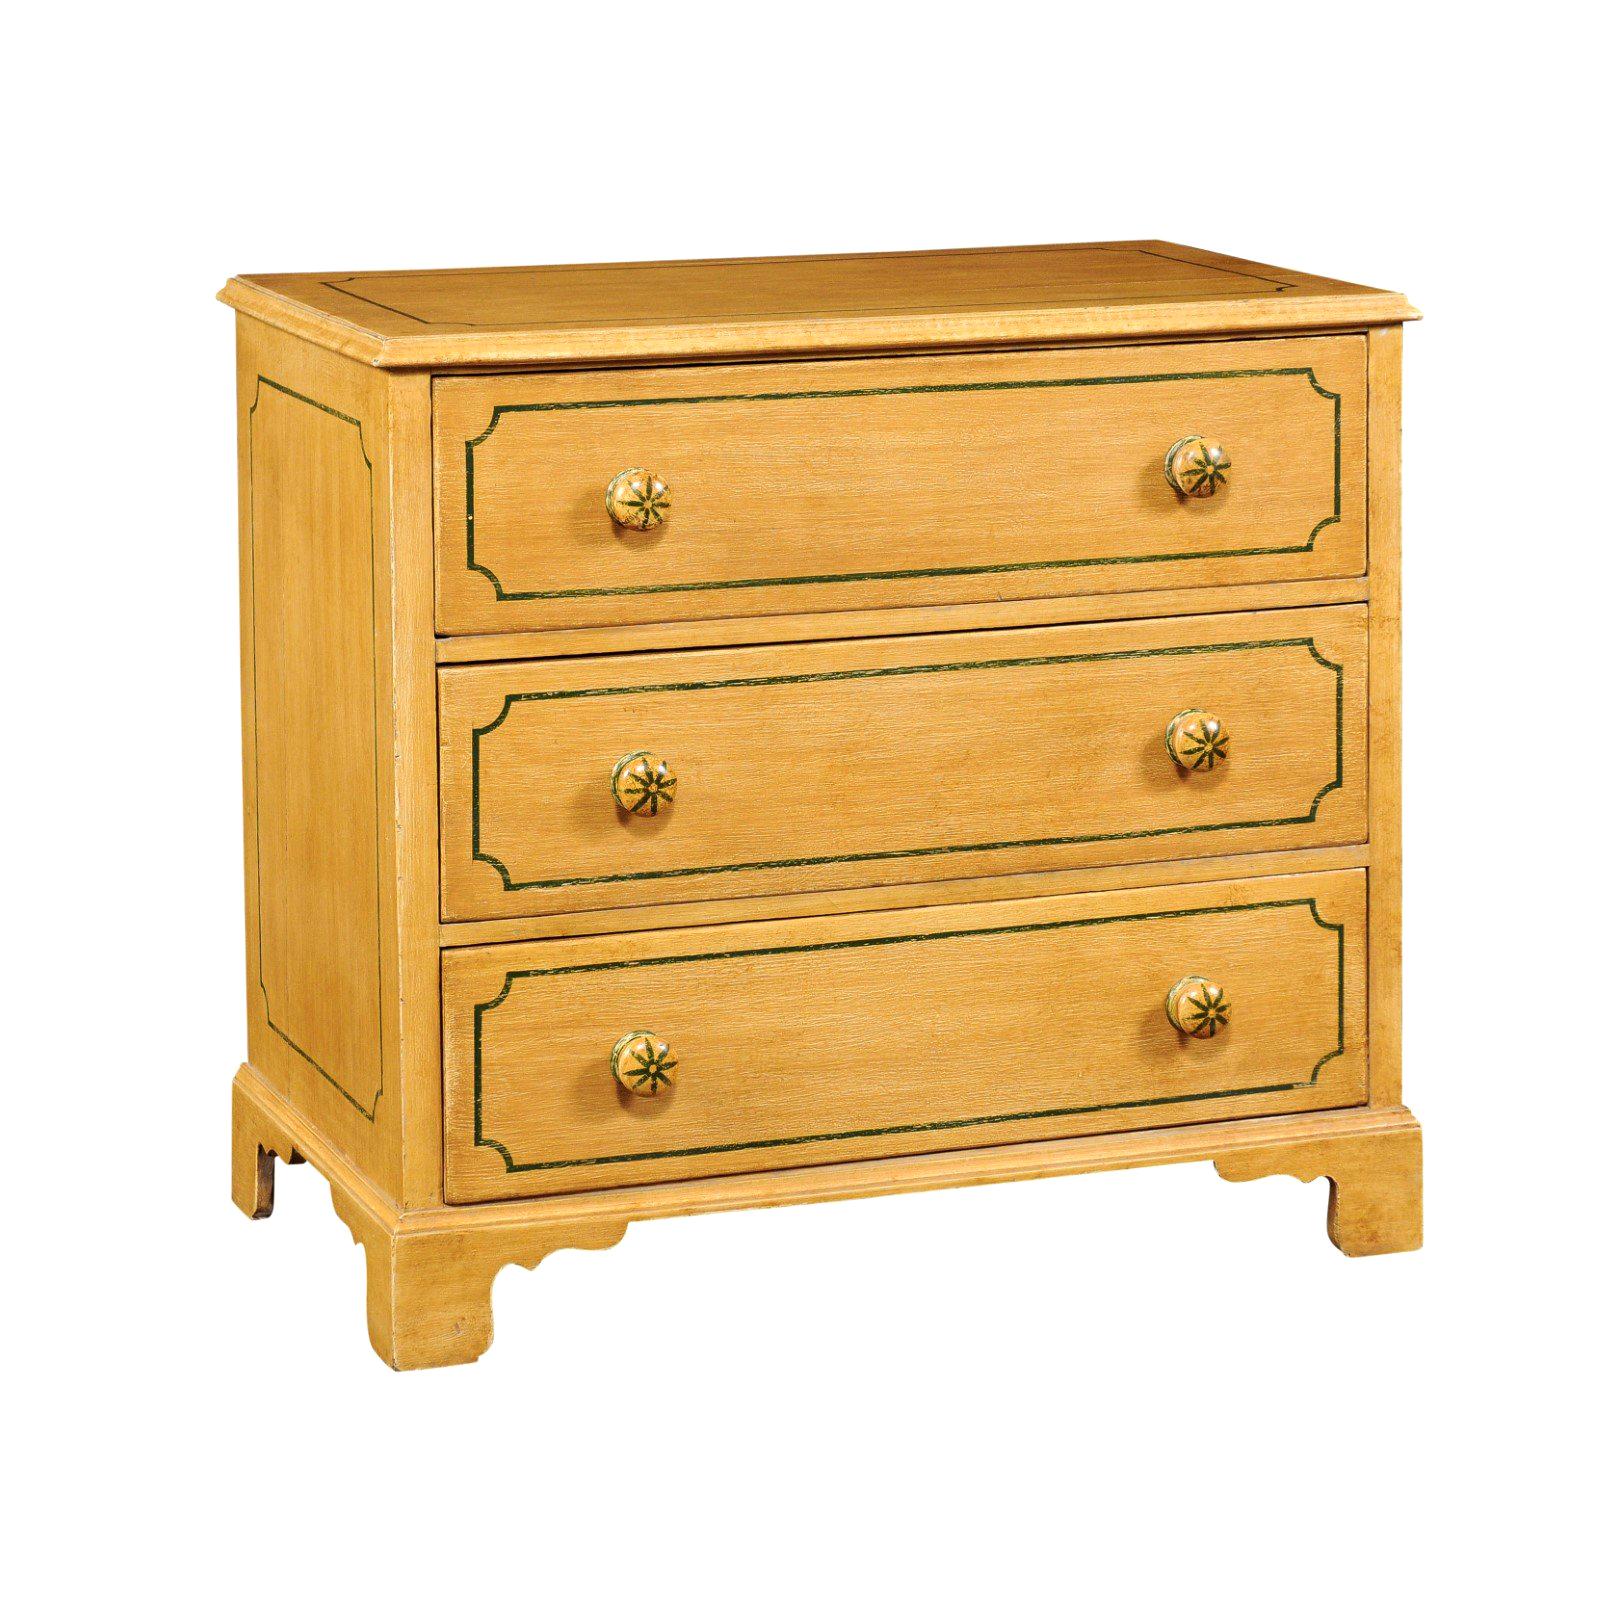 English 1950s Vintage Painted Three-Drawer Commode with Yellow Painted Finish